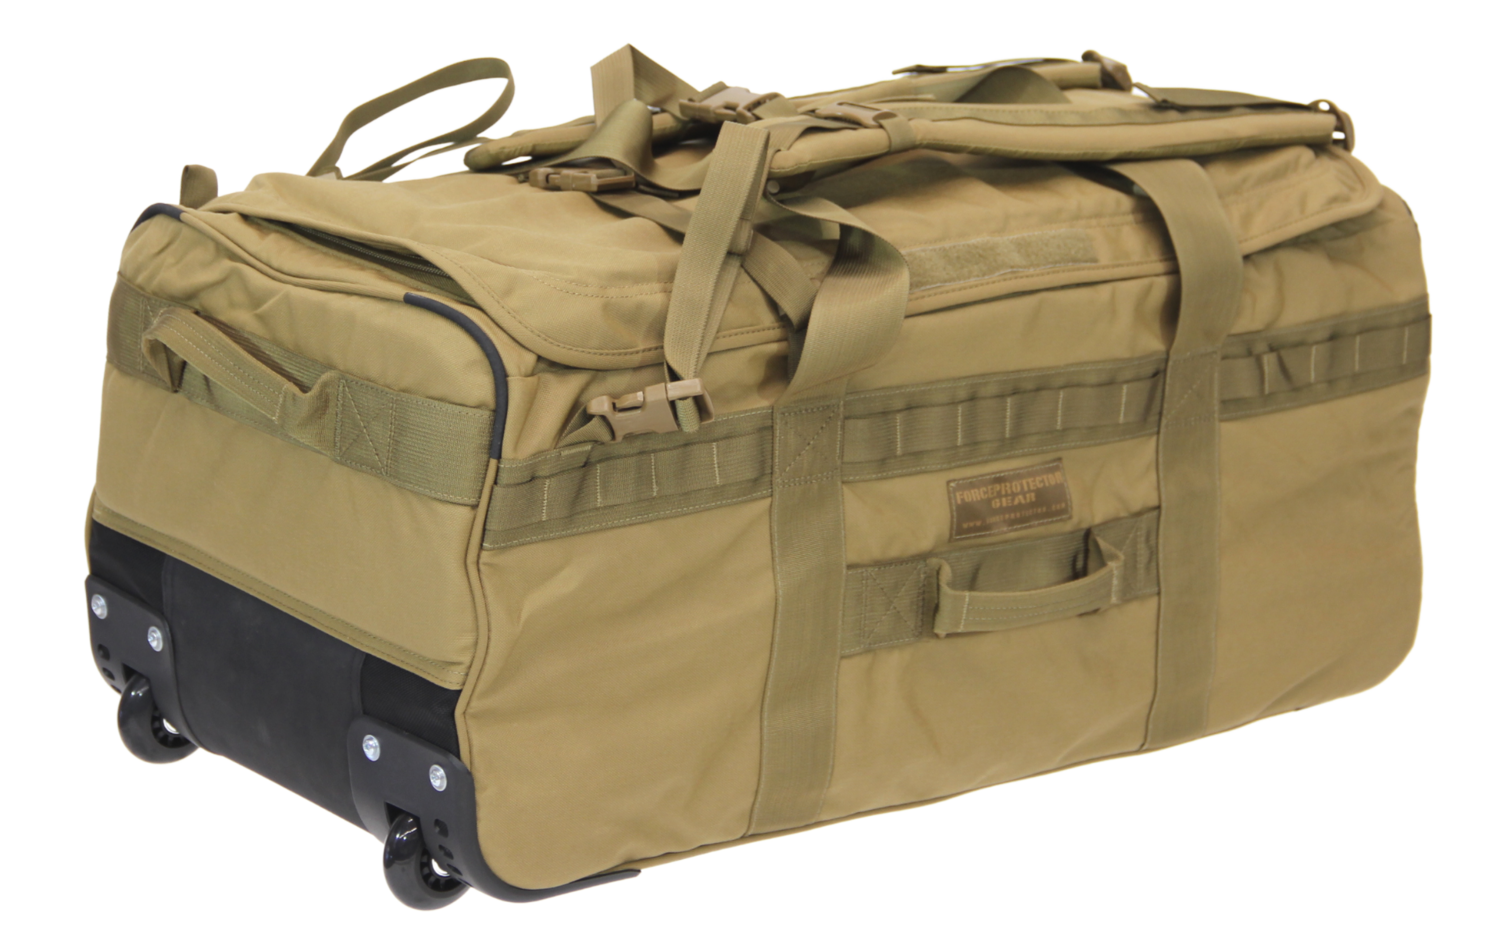 Collapsible Adventure Bag (CAB)